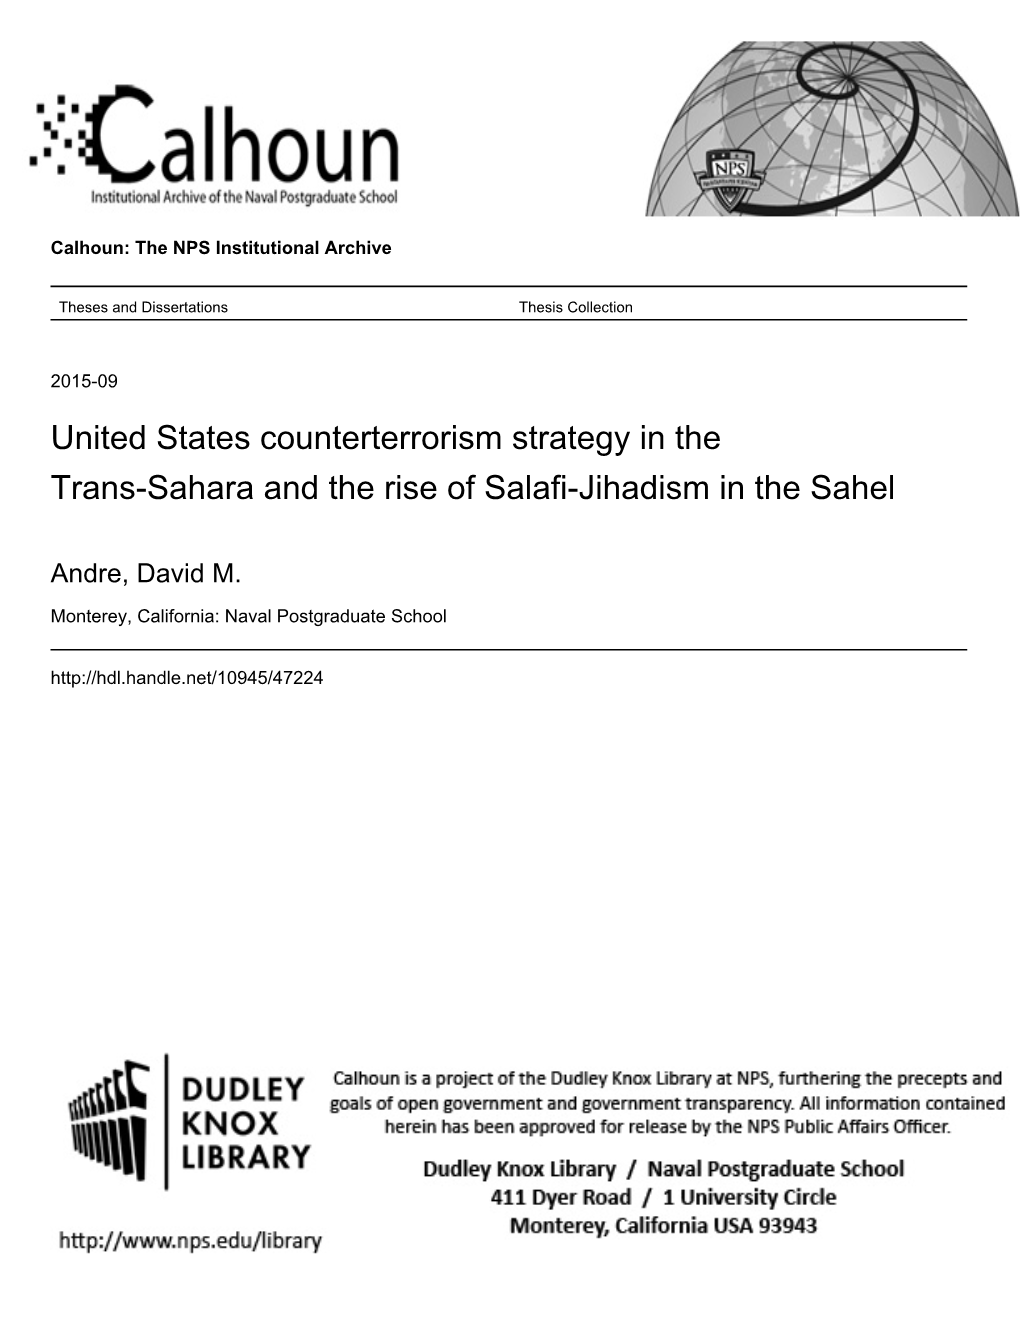 United States Counterterrorism Strategy in the Trans-Sahara and the Rise of Salafi-Jihadism in the Sahel